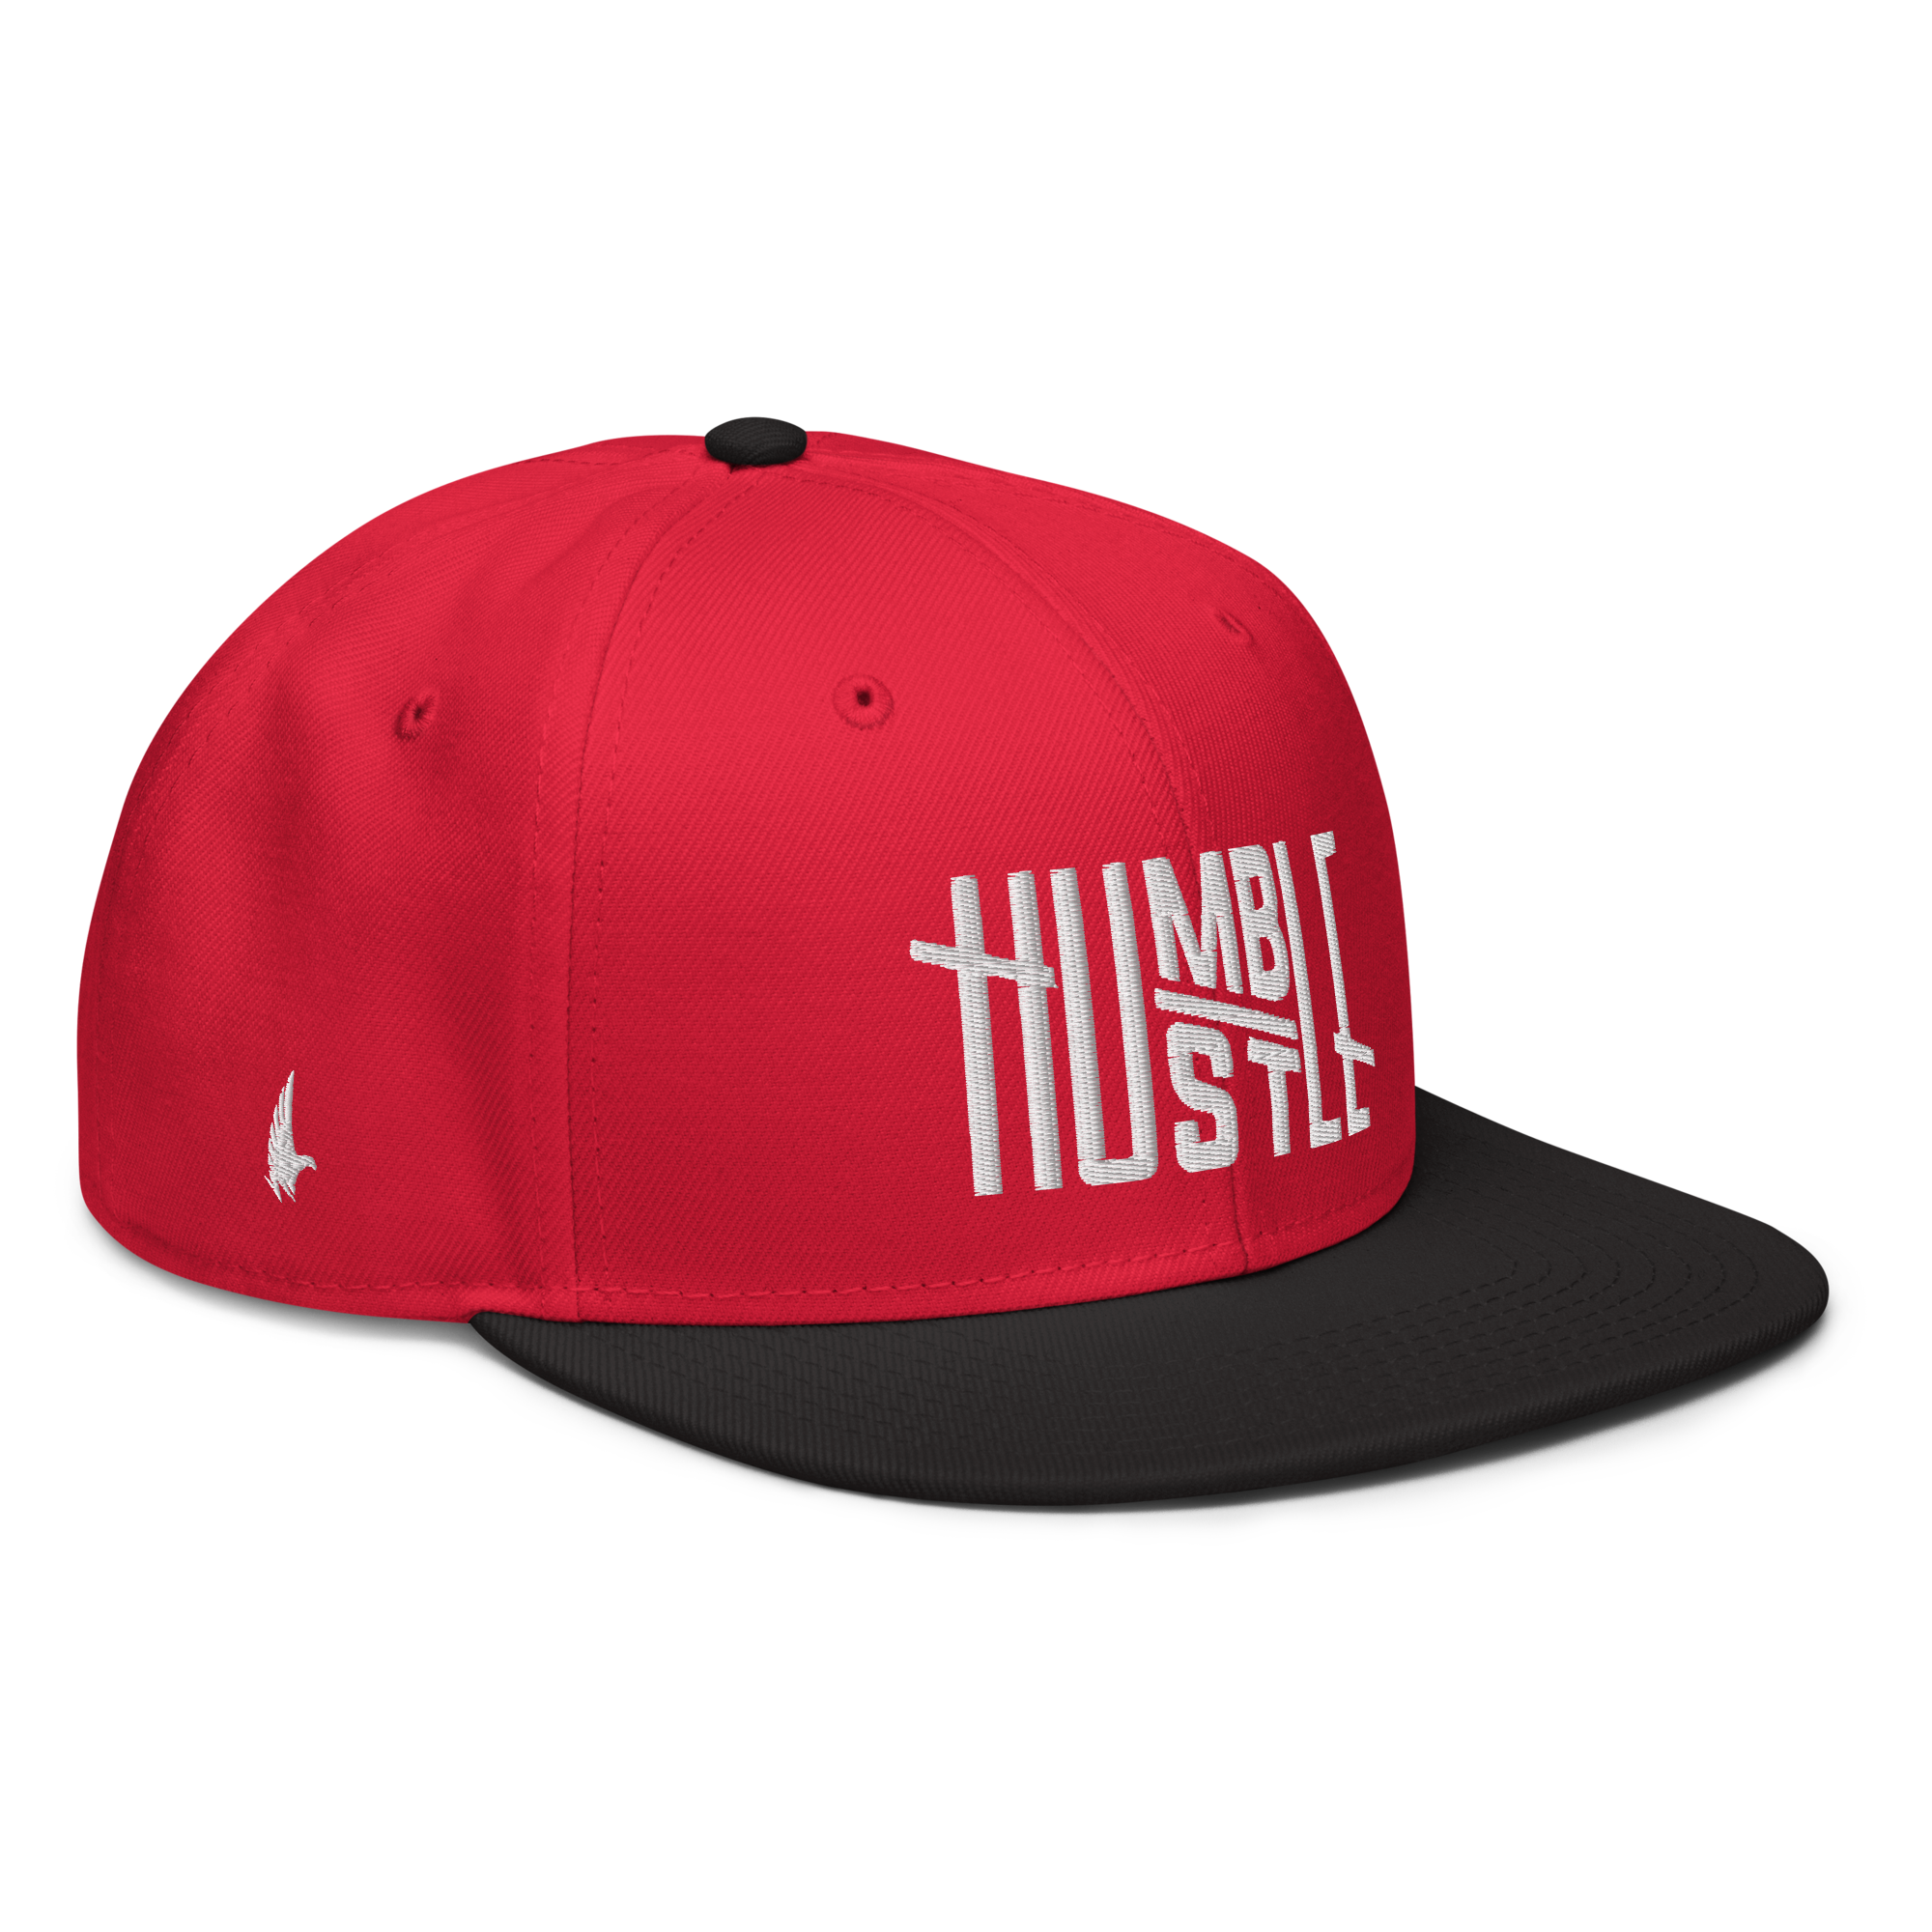 Humble Hustle Snapback Hat - Red/White/Black OS - Loyalty Vibes